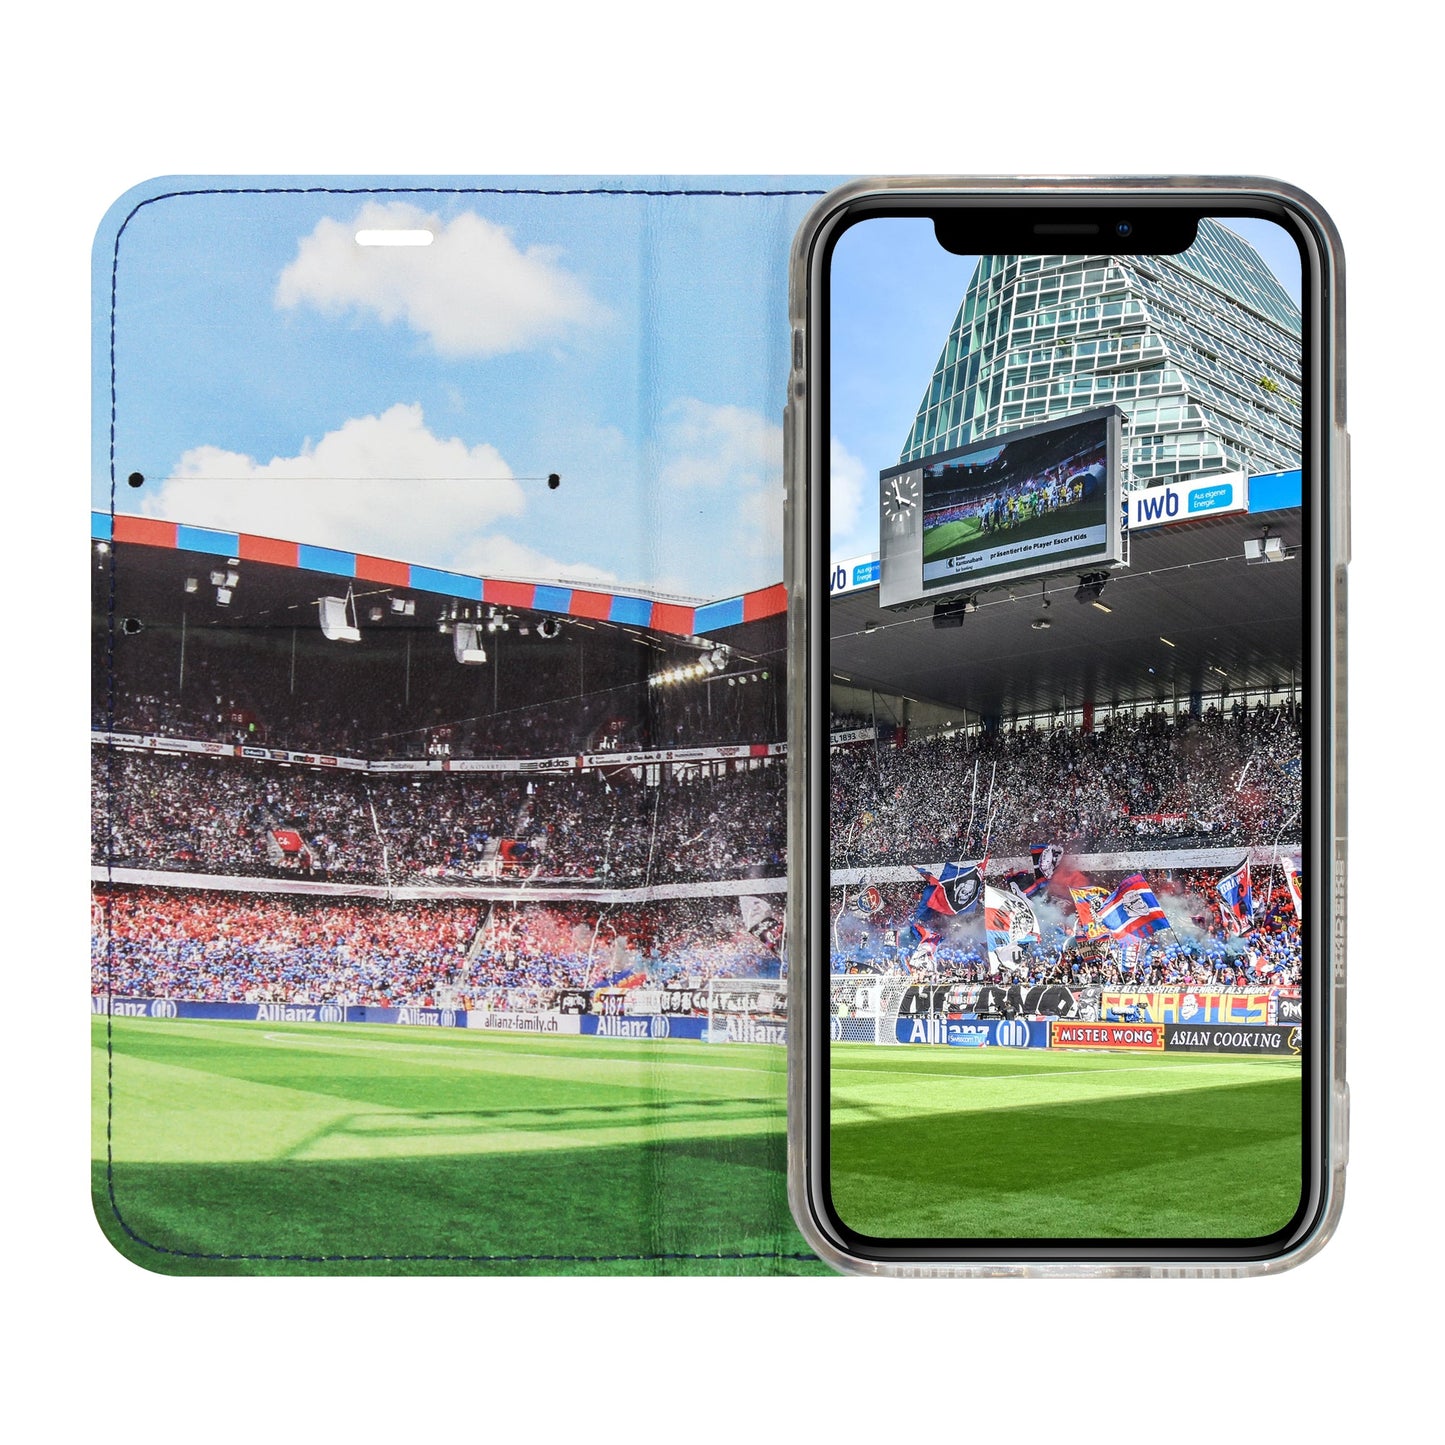 FCB Red / Blue Panorama Case for iPhone X/XS